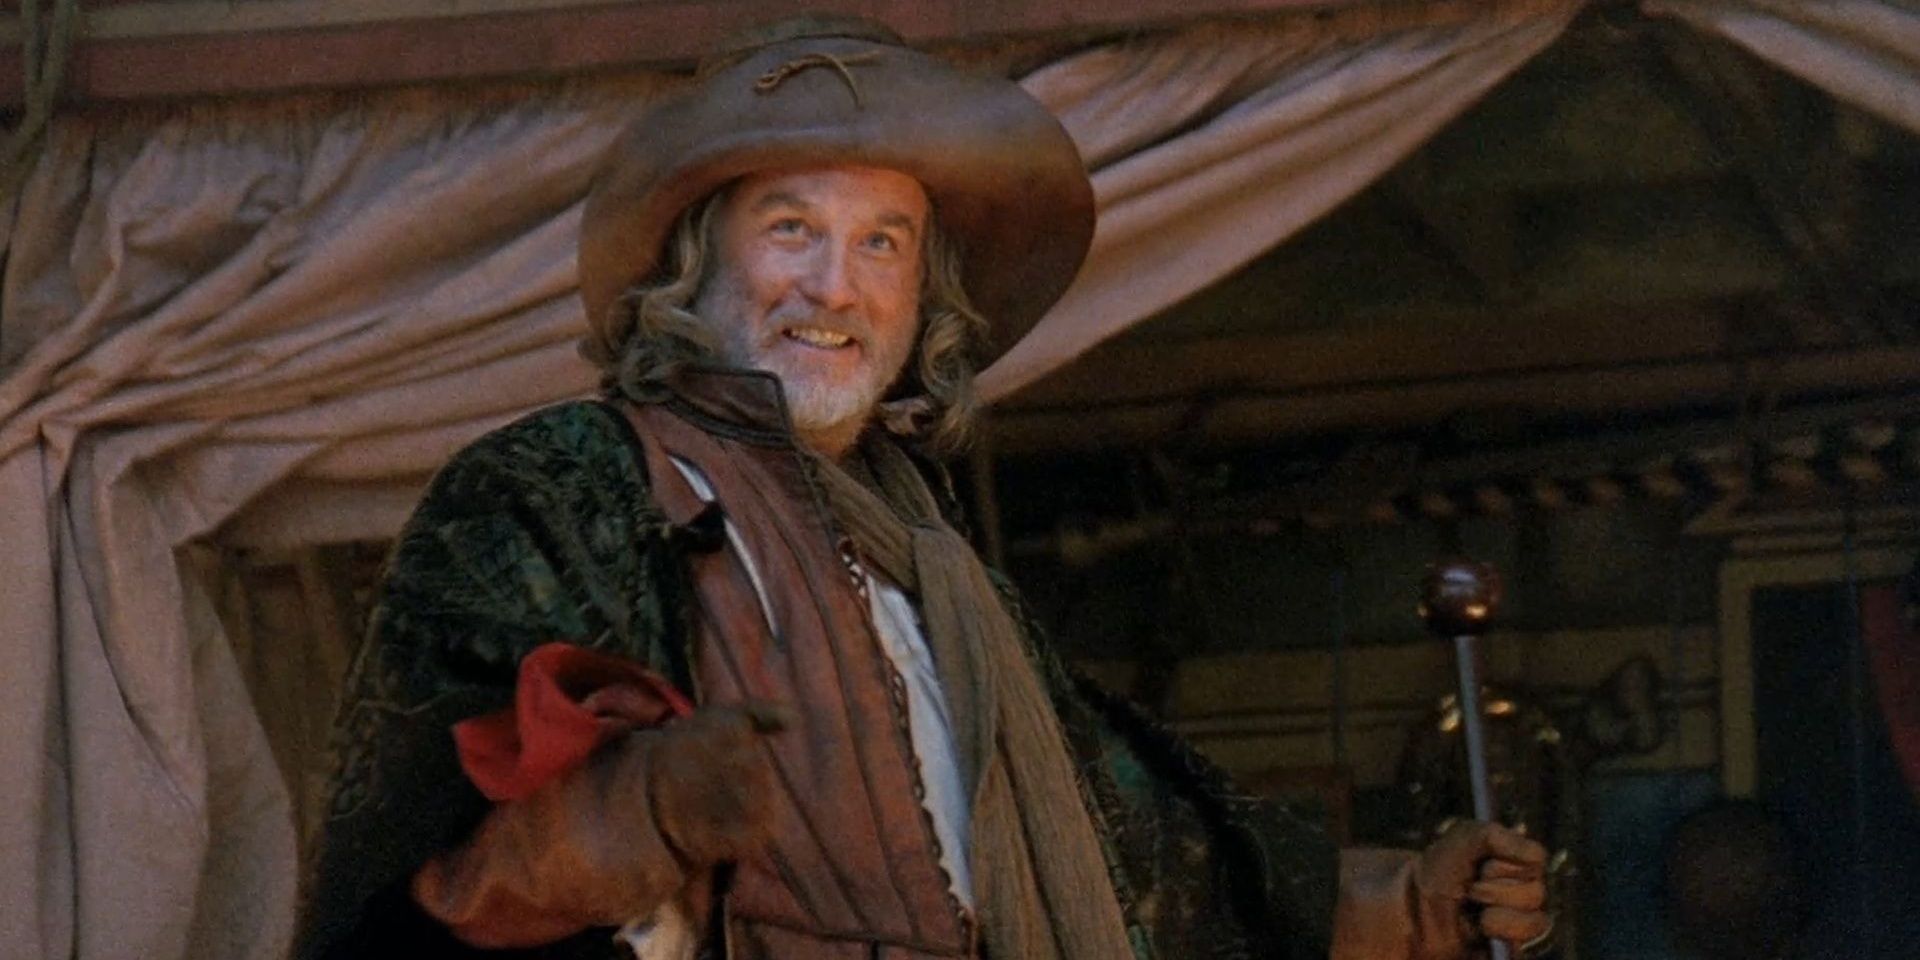 Richard Dreyfuss dressed in garb, smiling and looking off camera in Rosencrantz and Guildenstern are dead